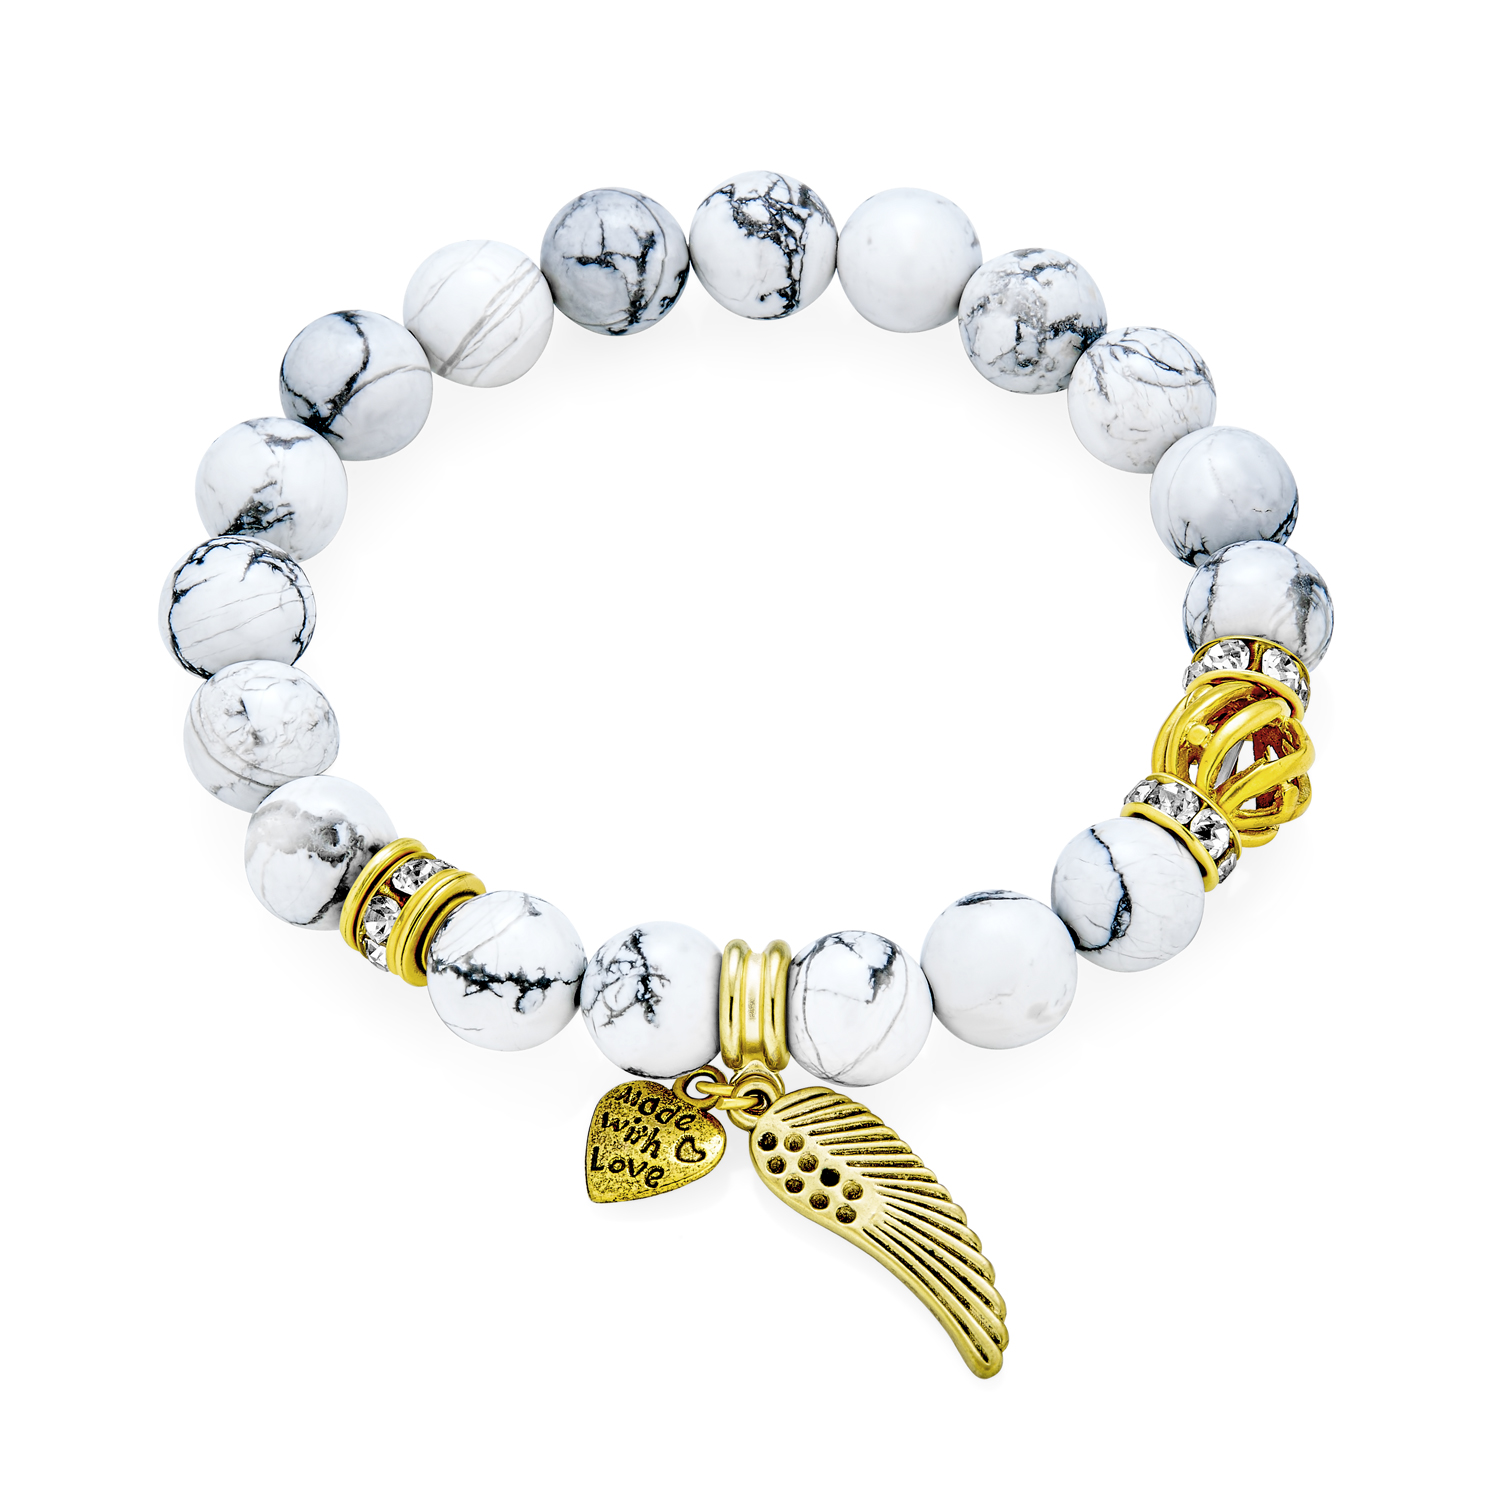 Bling Jewelry White Angel Wing Charm Stretch Bracelet Bead Howlite Charm Gold Plated - image 2 of 6